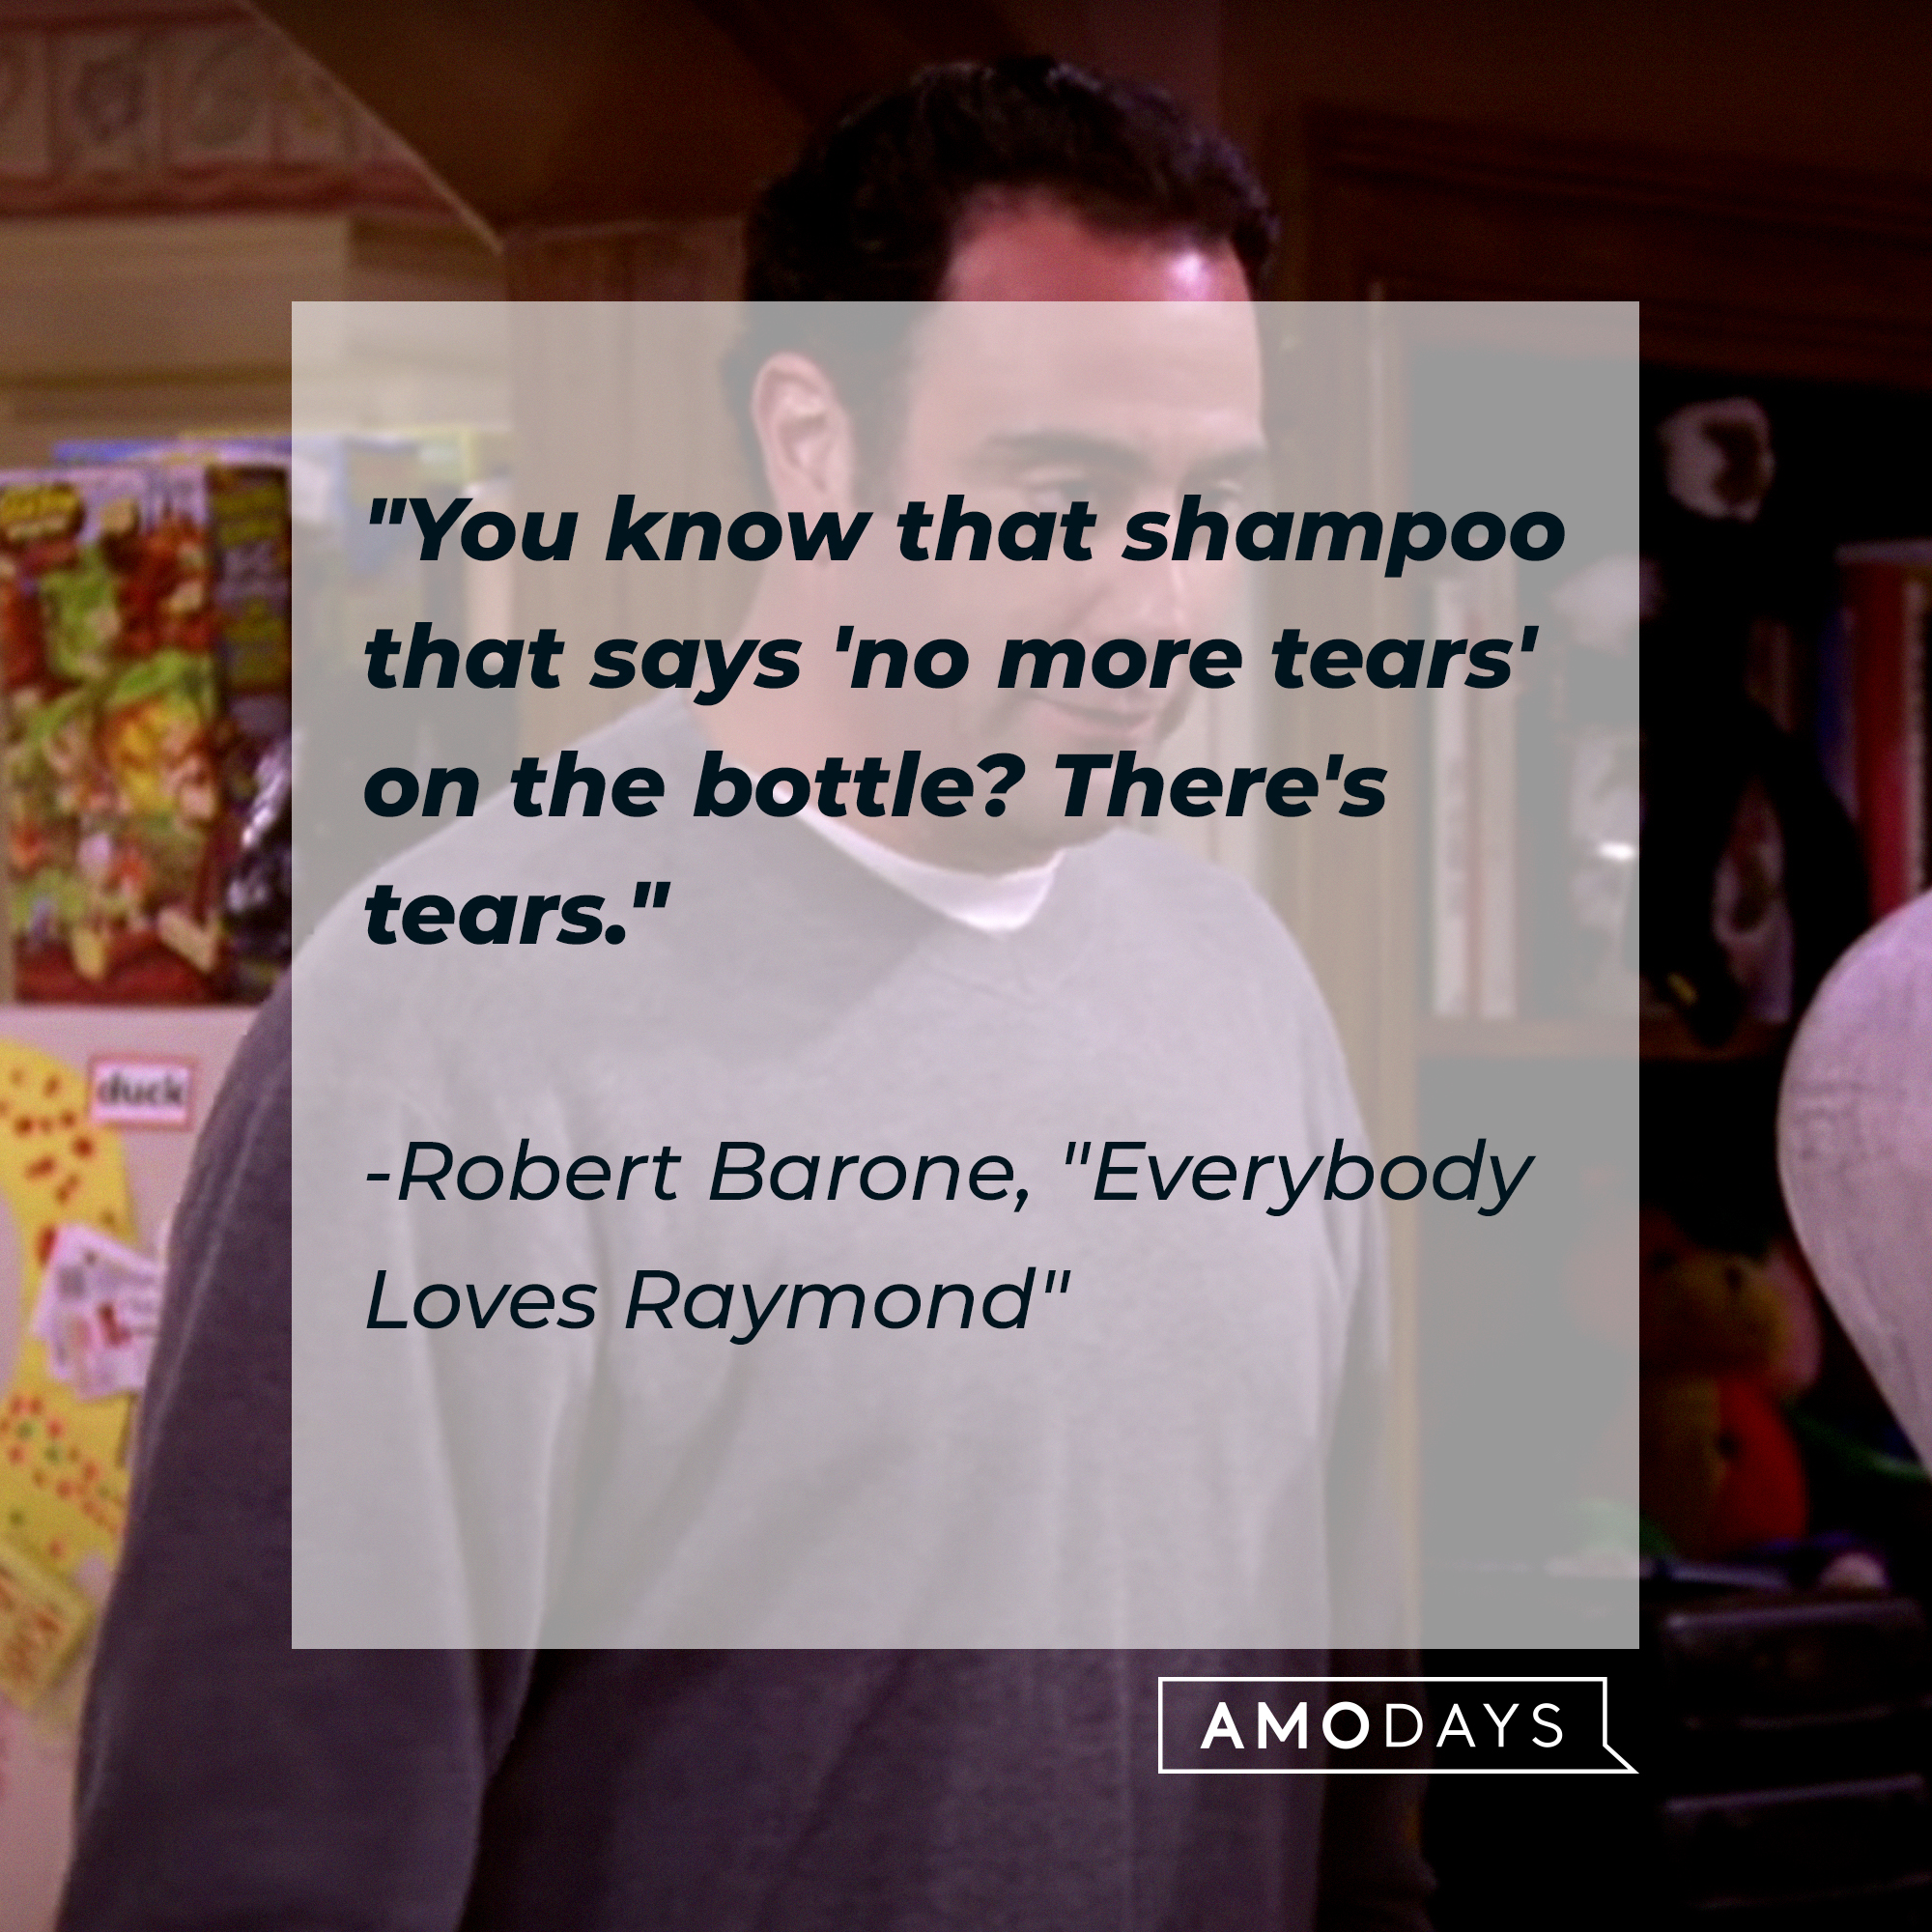 "Everybody Loves Raymond" quote, "You know that shampoo that says 'no more tears' on the bottle? There's tears." | Source: Facebook/EverybodyLovesRaymondTVShow